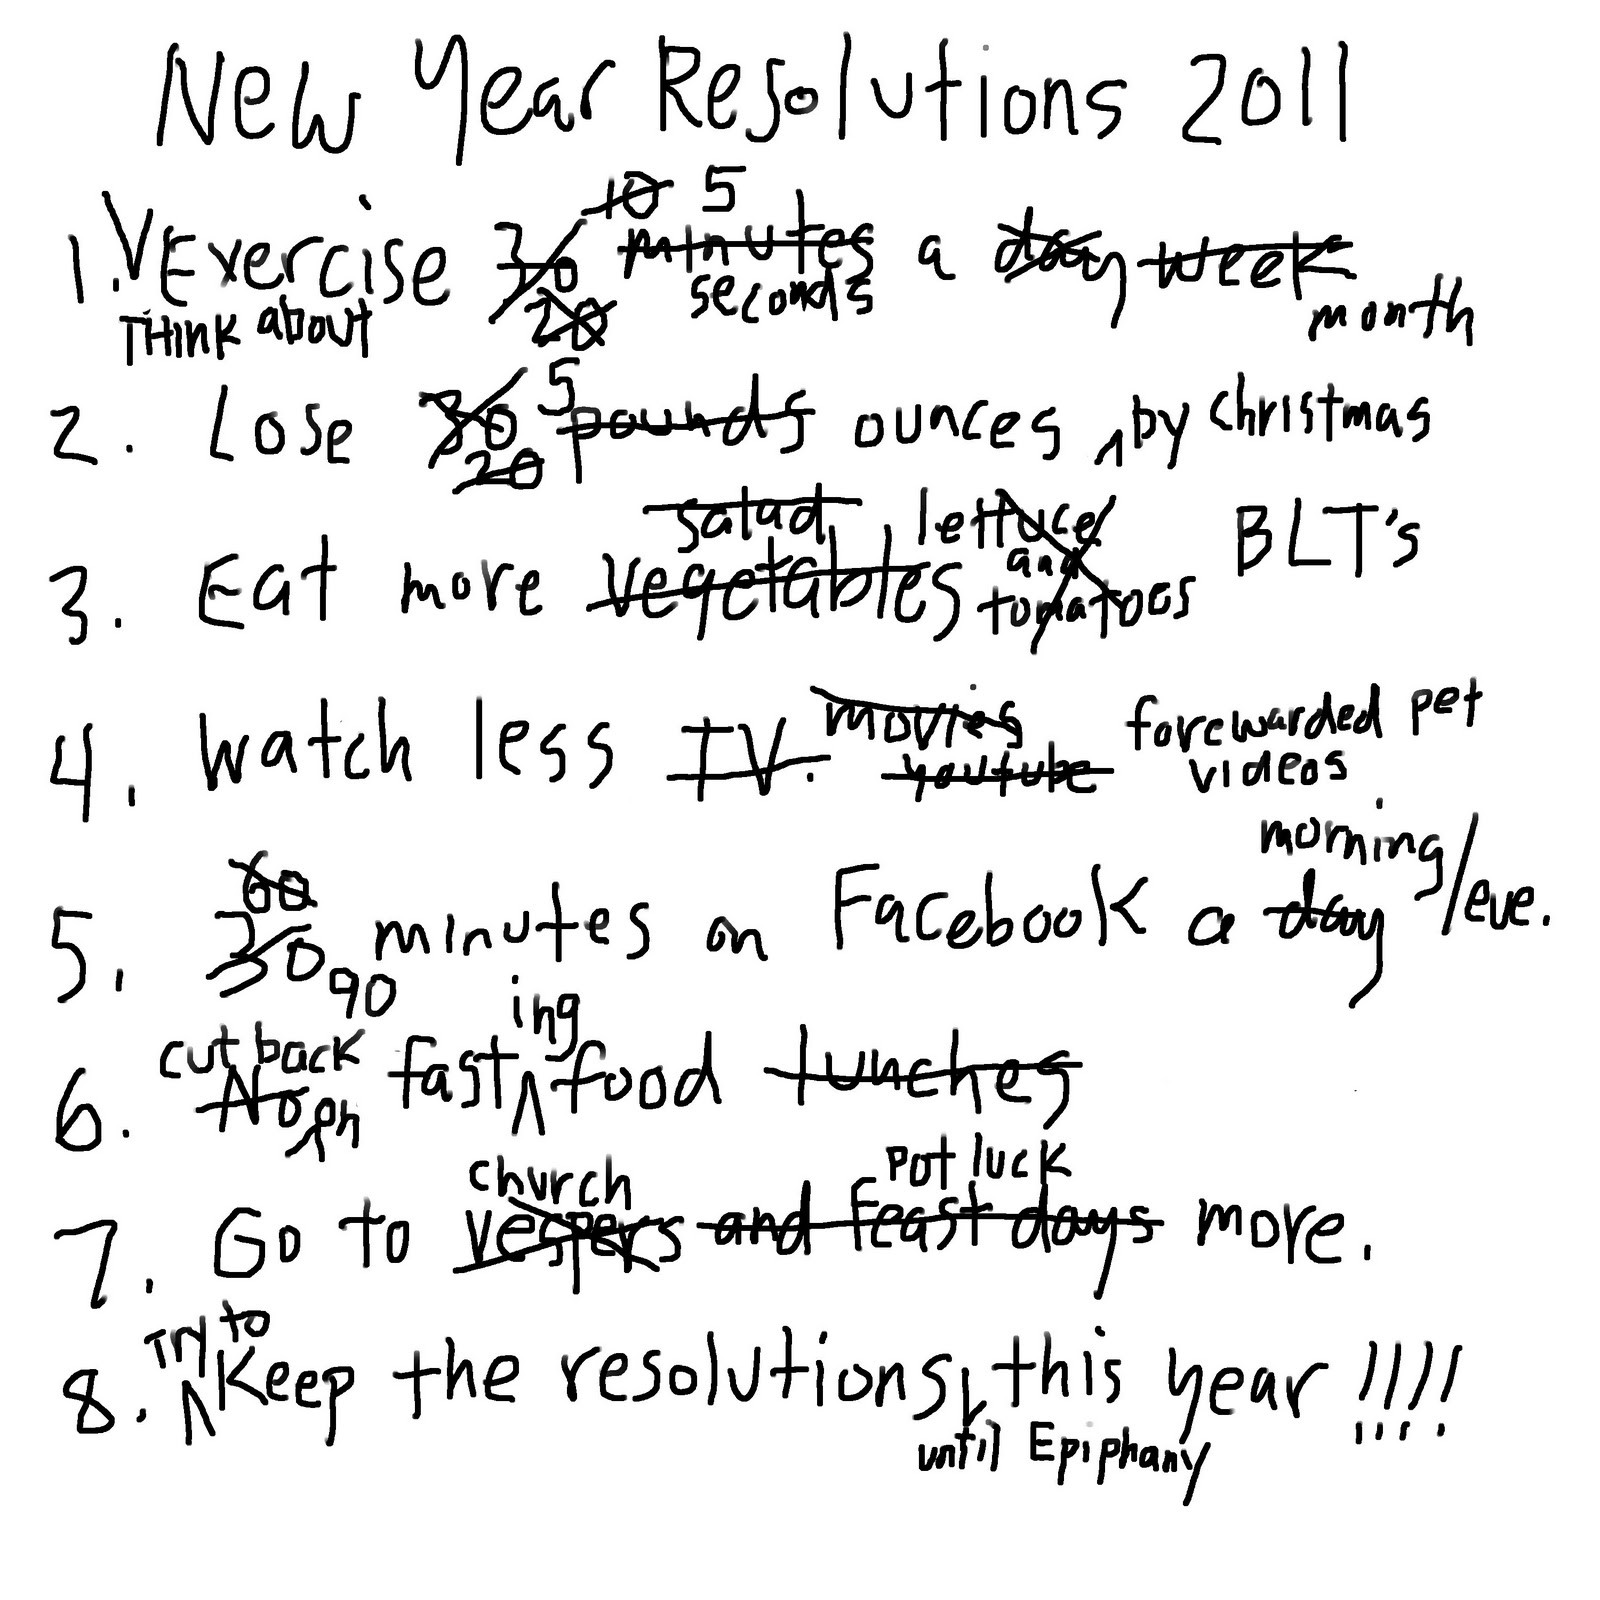 New Years Resolutions Quotes Funny
 Humorous New Years Resolutions Quotes QuotesGram